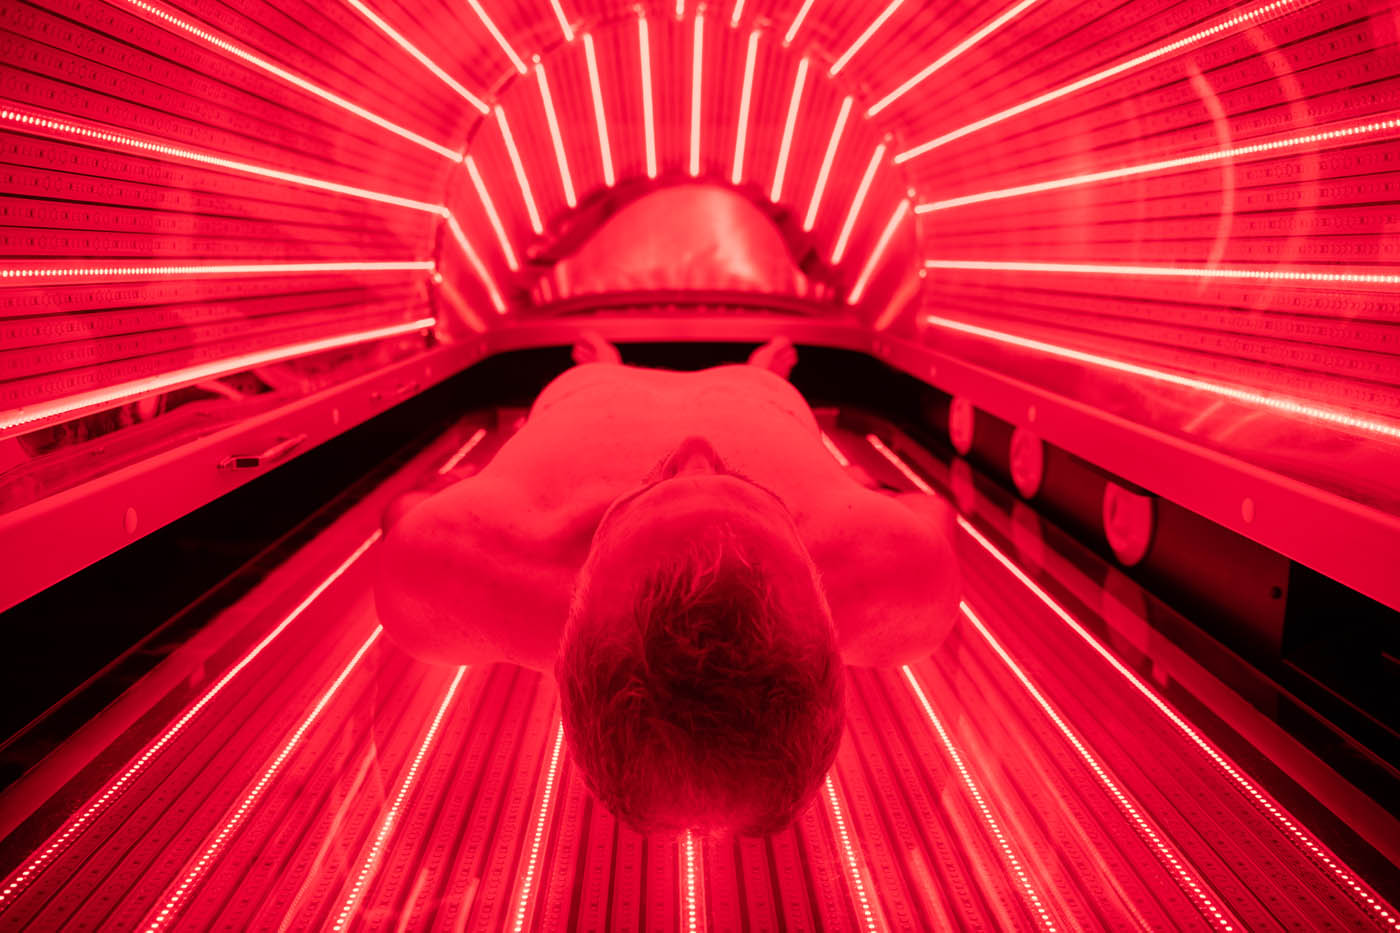 A man getting into a dark pod with bright red light, contact Light Lounge today for your infrared light therapy in Evergreen.